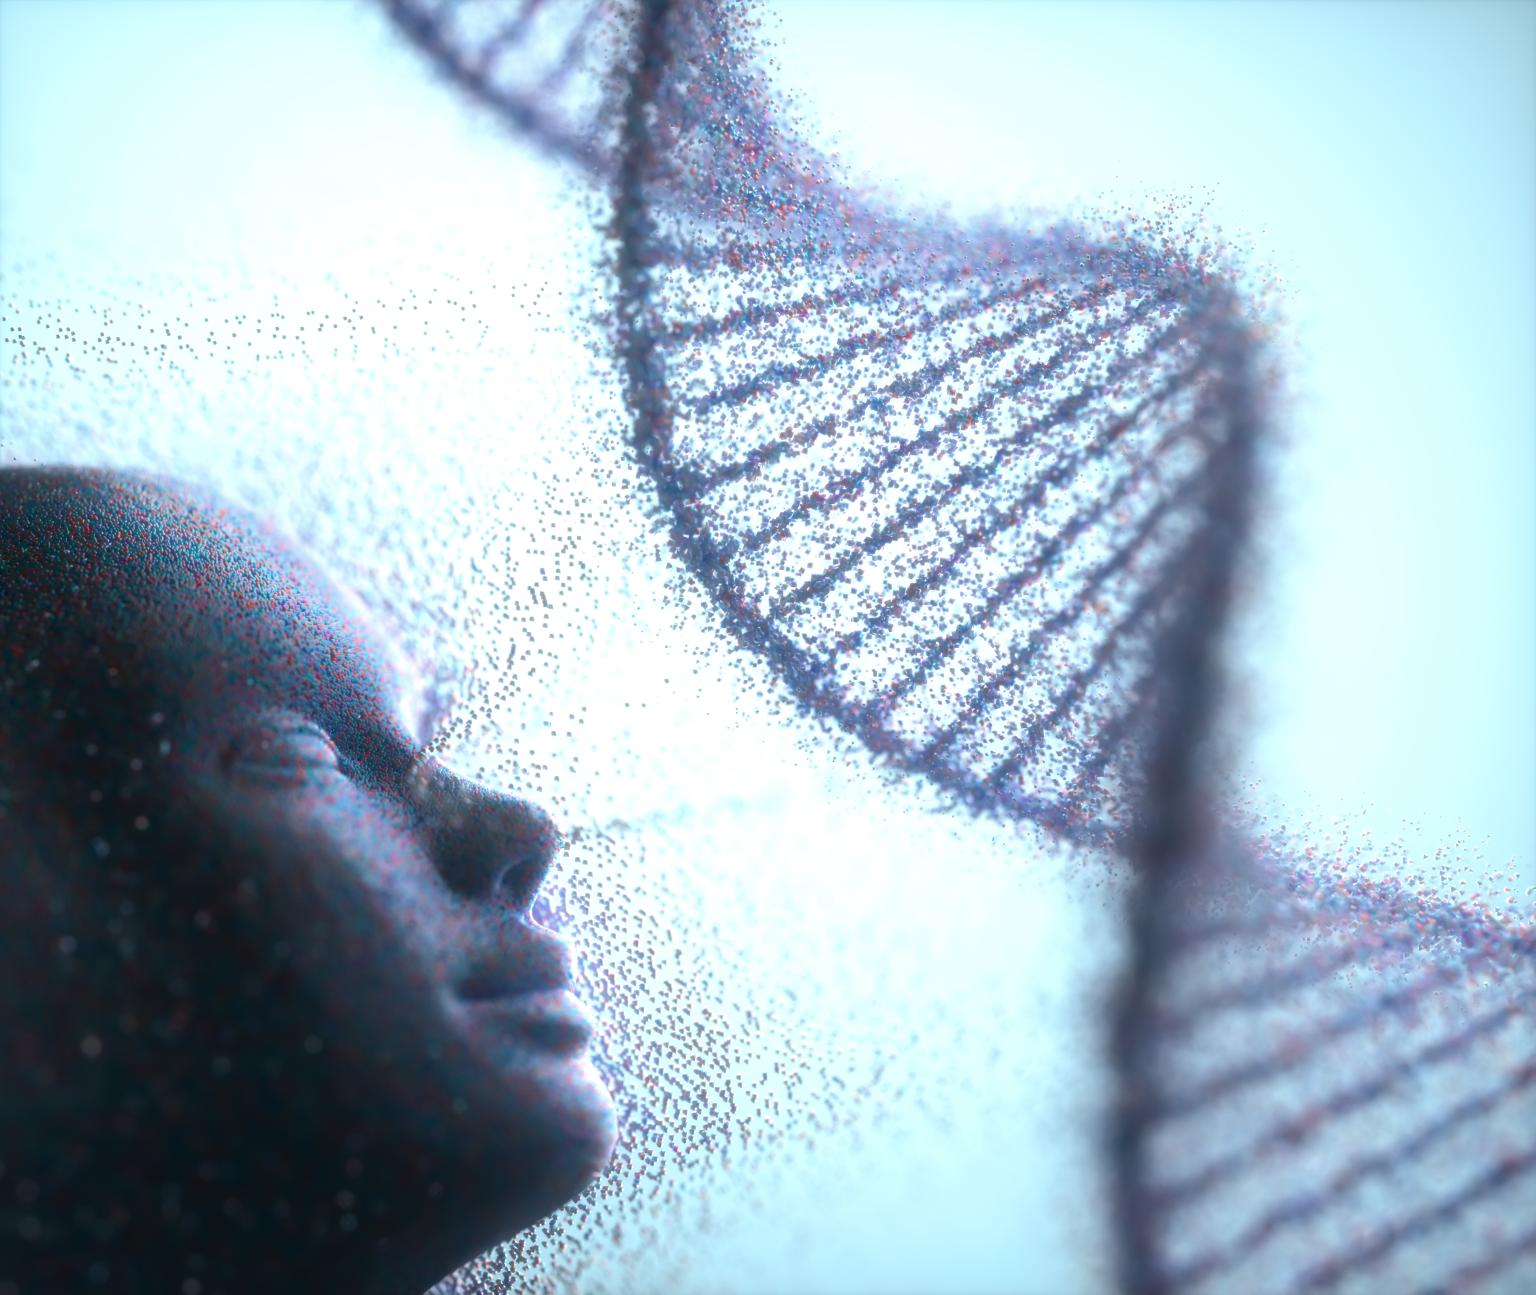 image of face and dna strand